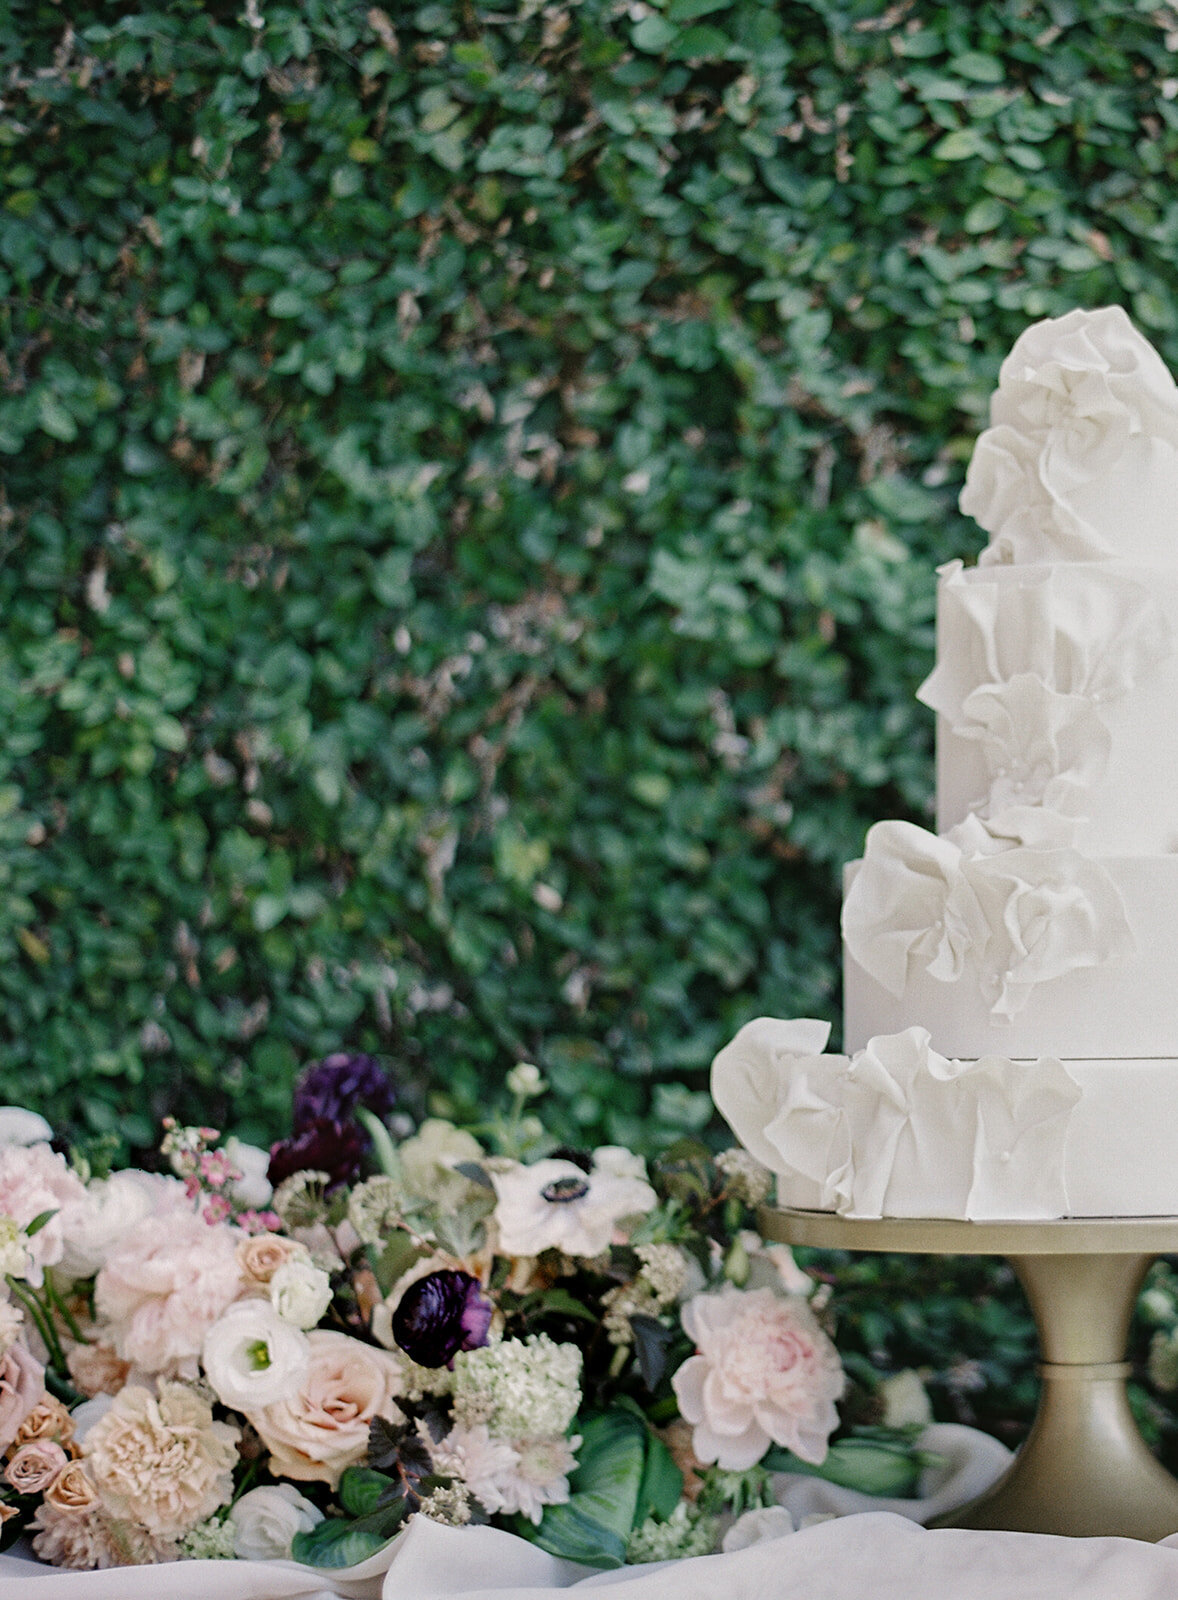 White wedding cake on gold pedestal with bold florals against an ivy wall. Cake is three tiers with icing creating ruffles coming off of all three tiers. Photographed by wedding photographers in Charleston Amy Mulder Photography.